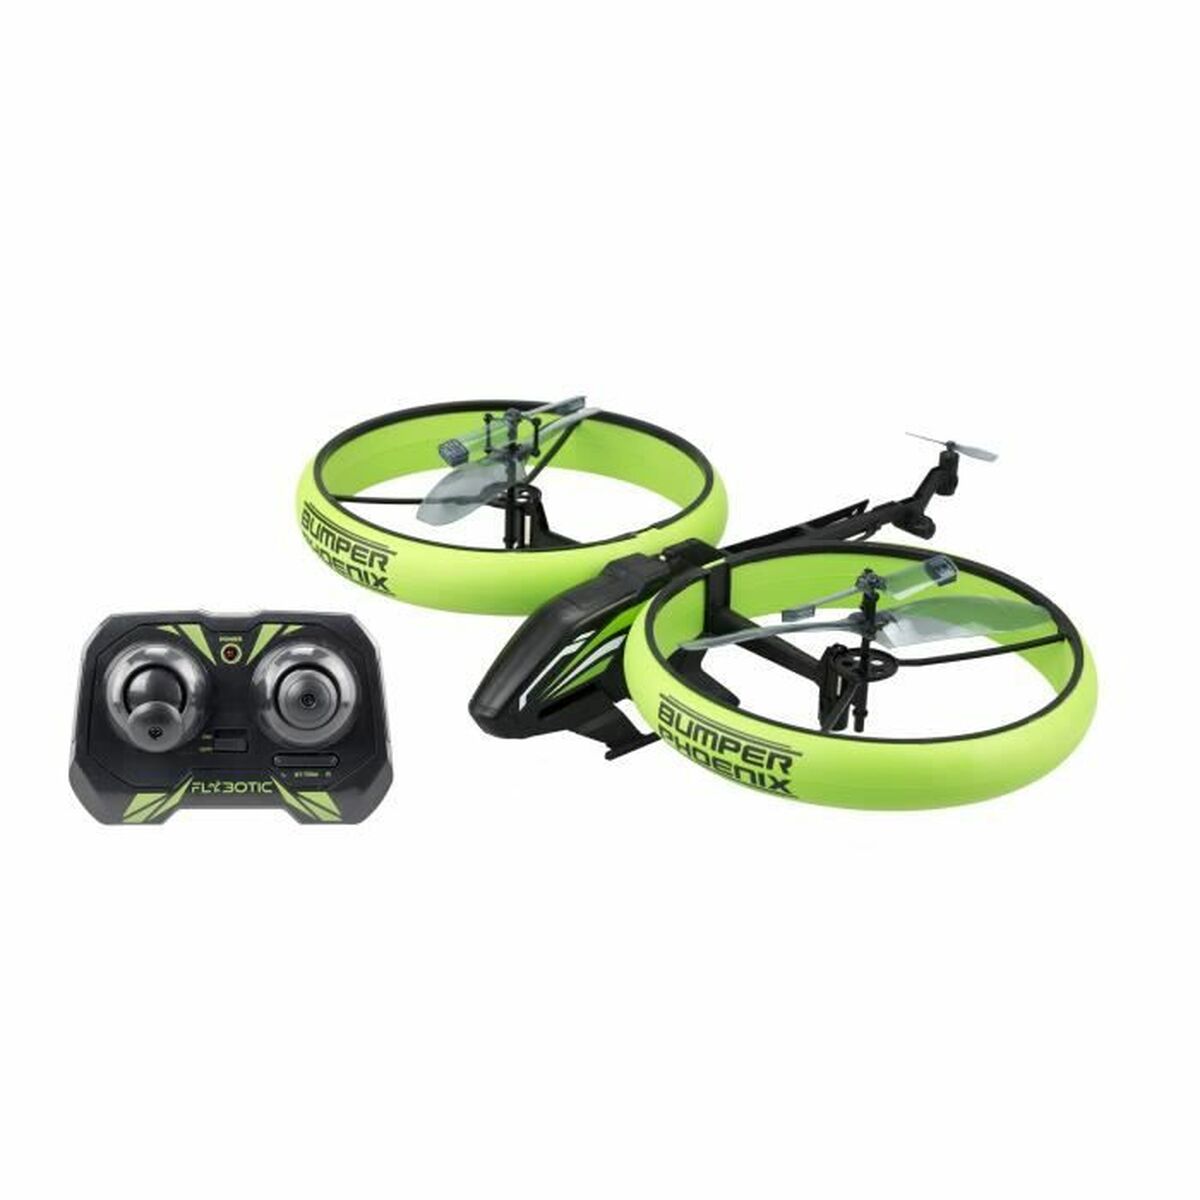 Radio control Helicopter Flybotic SL84814